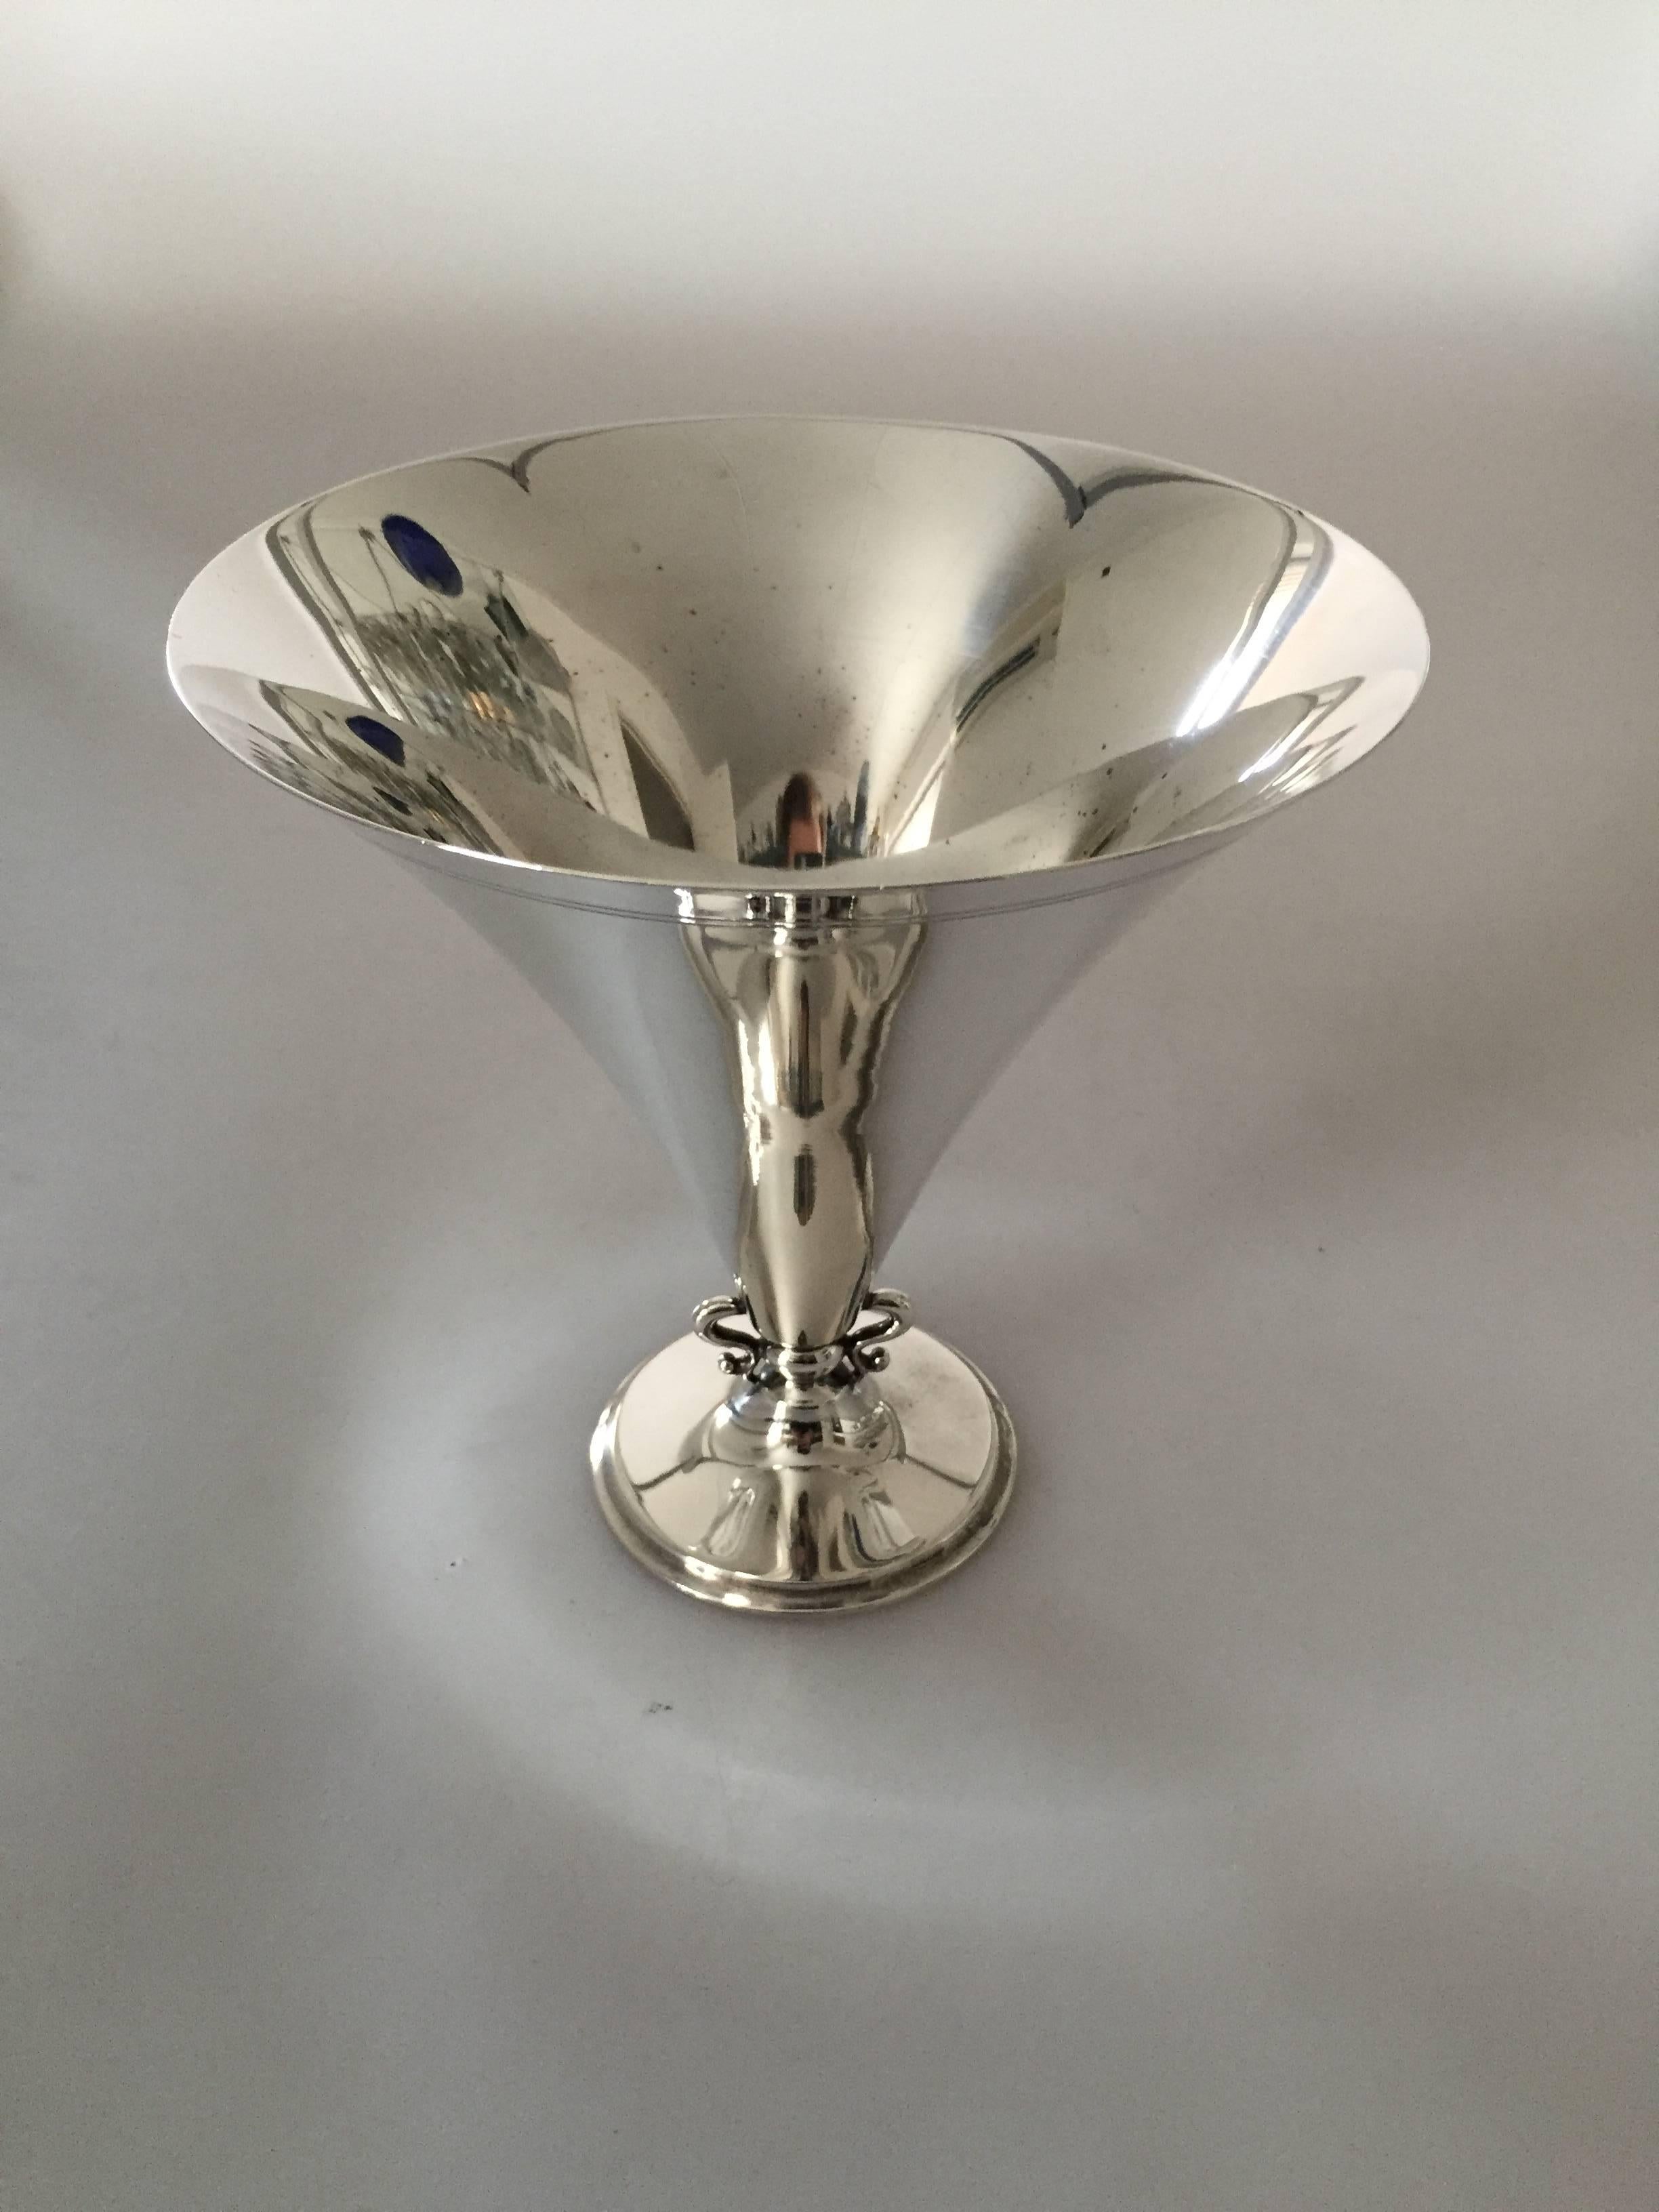 Just Andersen silver vase made at GAB, Sweden.

Just Andersen (1884-1943) was a Danish silversmith born on Greenland. He began his company in 1918 producing both corpus and silverware of high quality. Through his 1st wife he came in touch with the